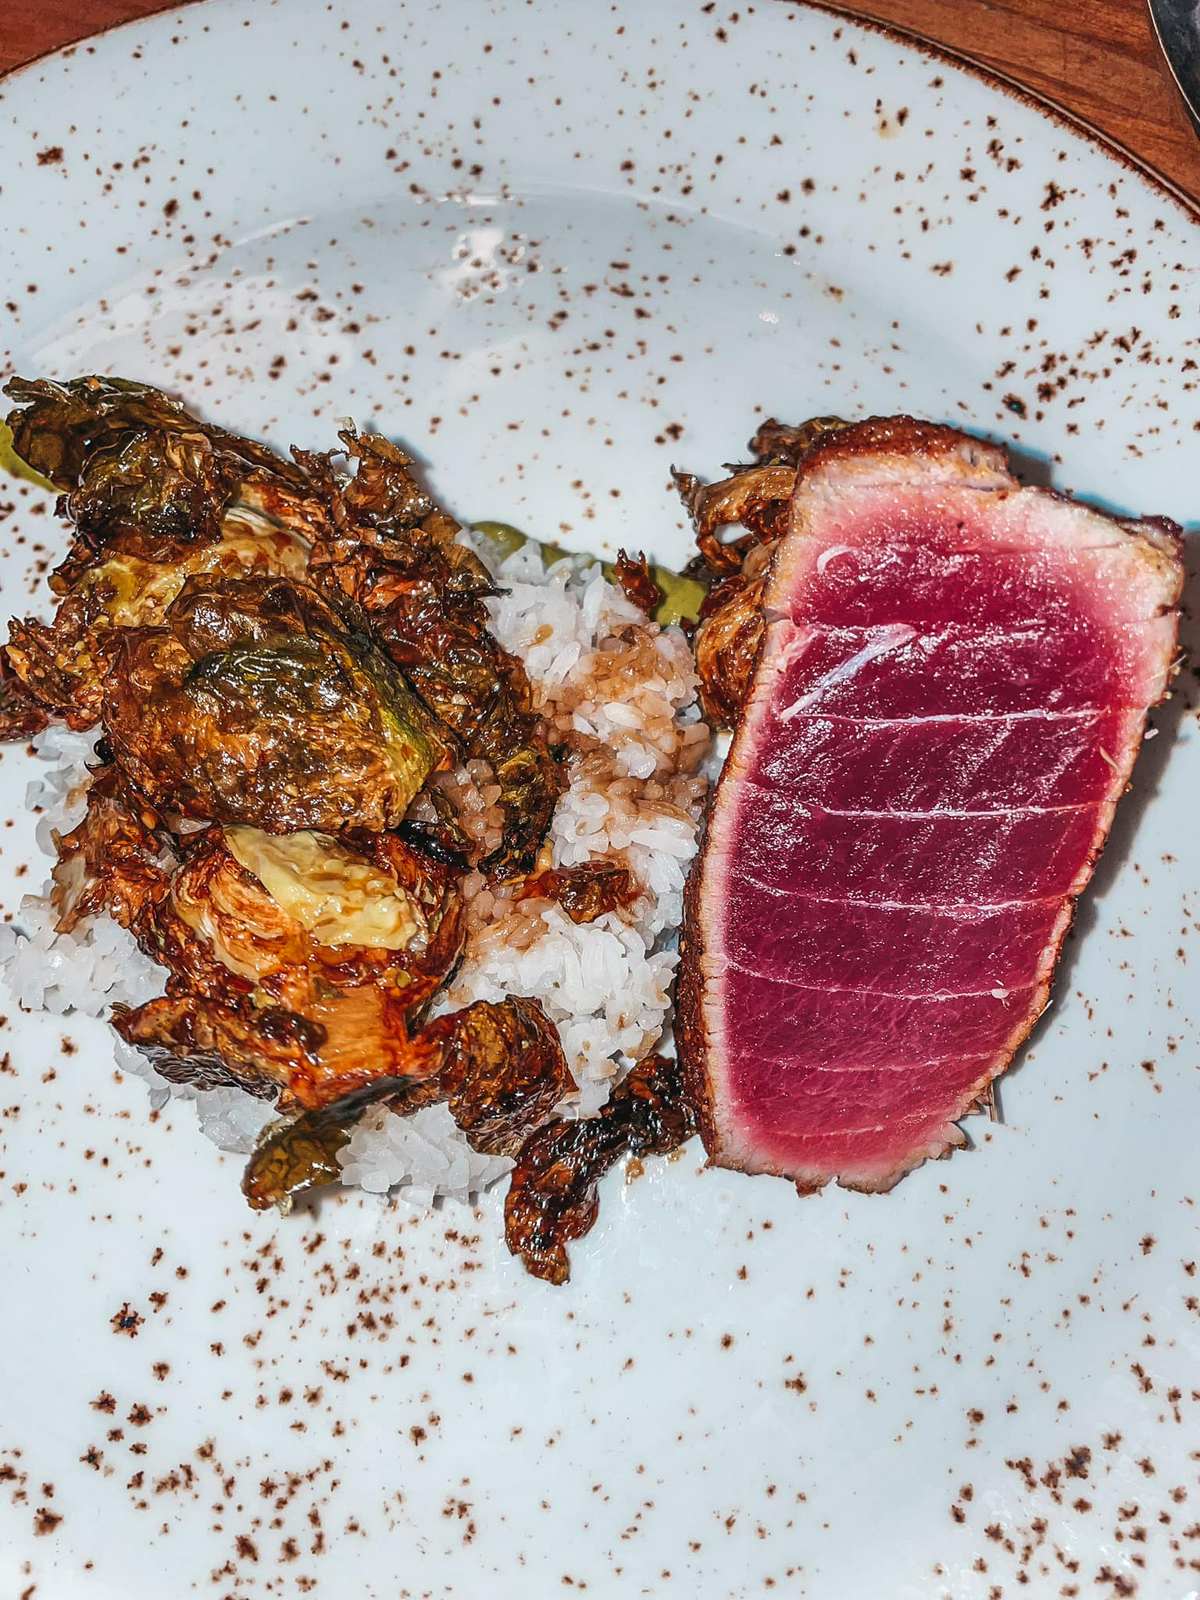 tuna and brussels sprouts from Oystercatchers in Tampa